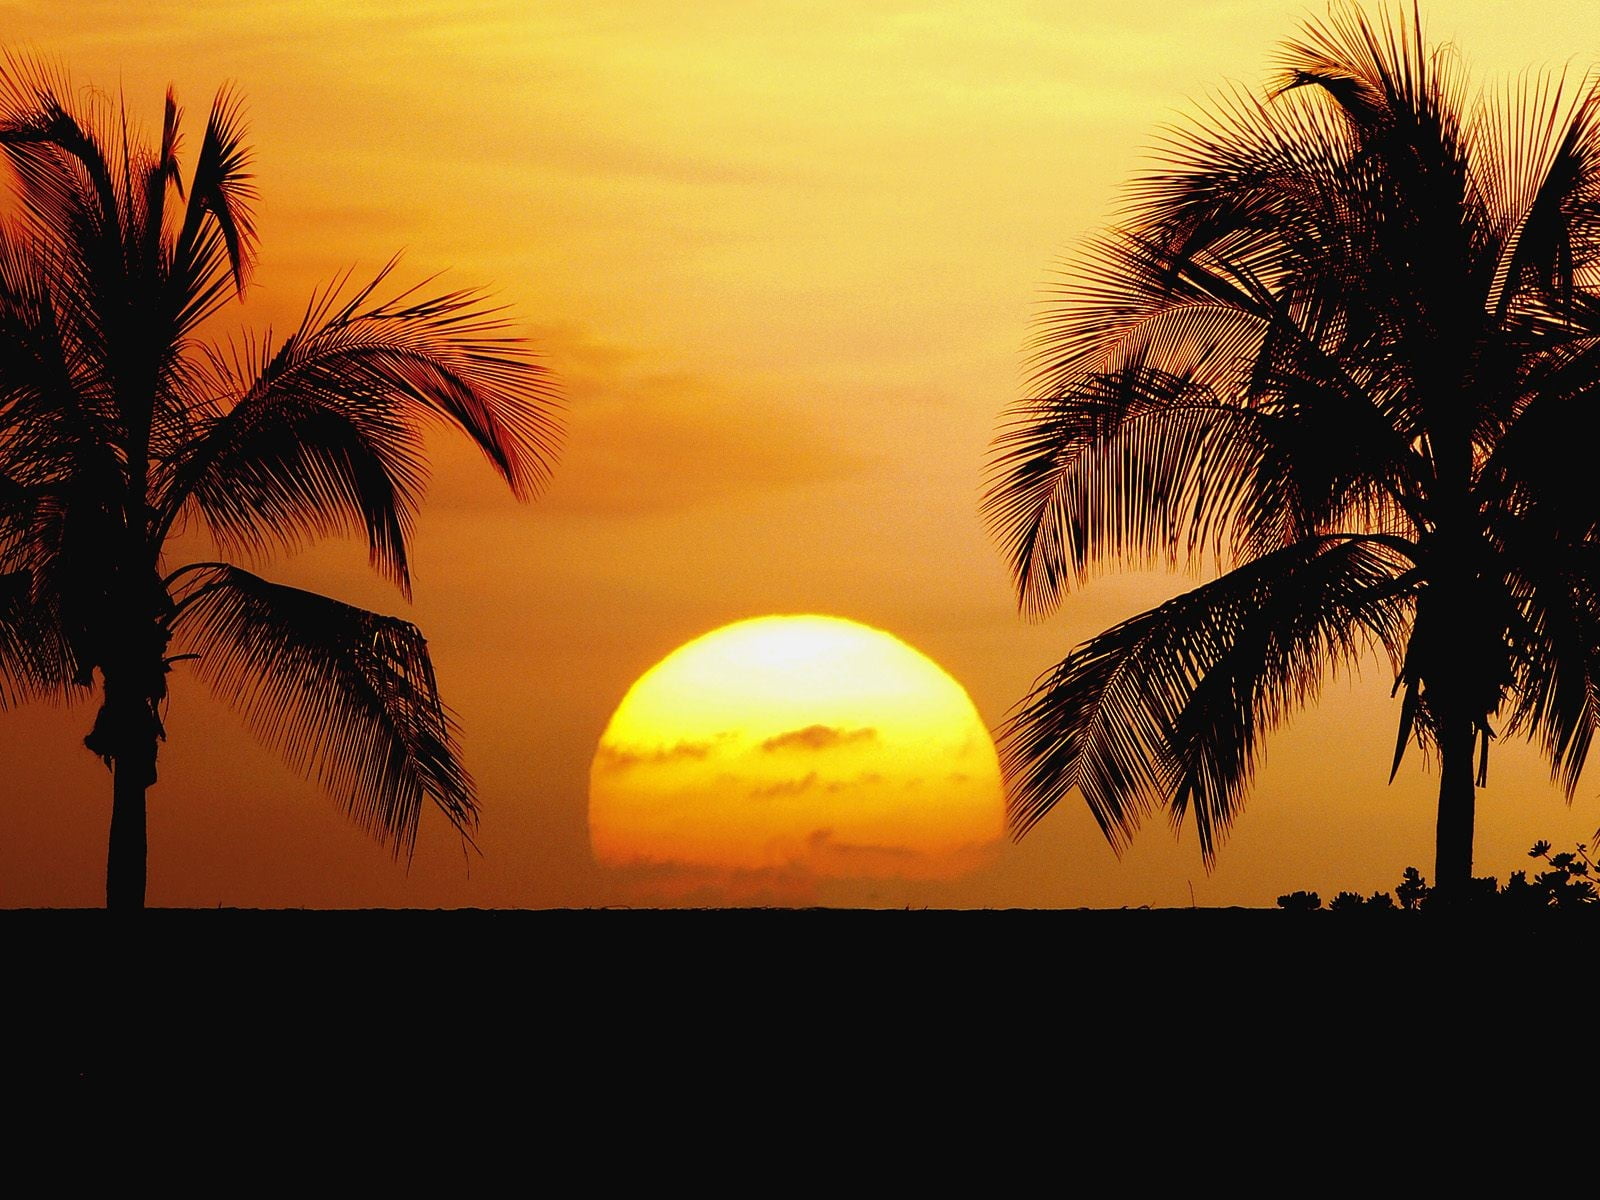 two coconut palm trees, sunset, tropical, silhouette, sky, horizon